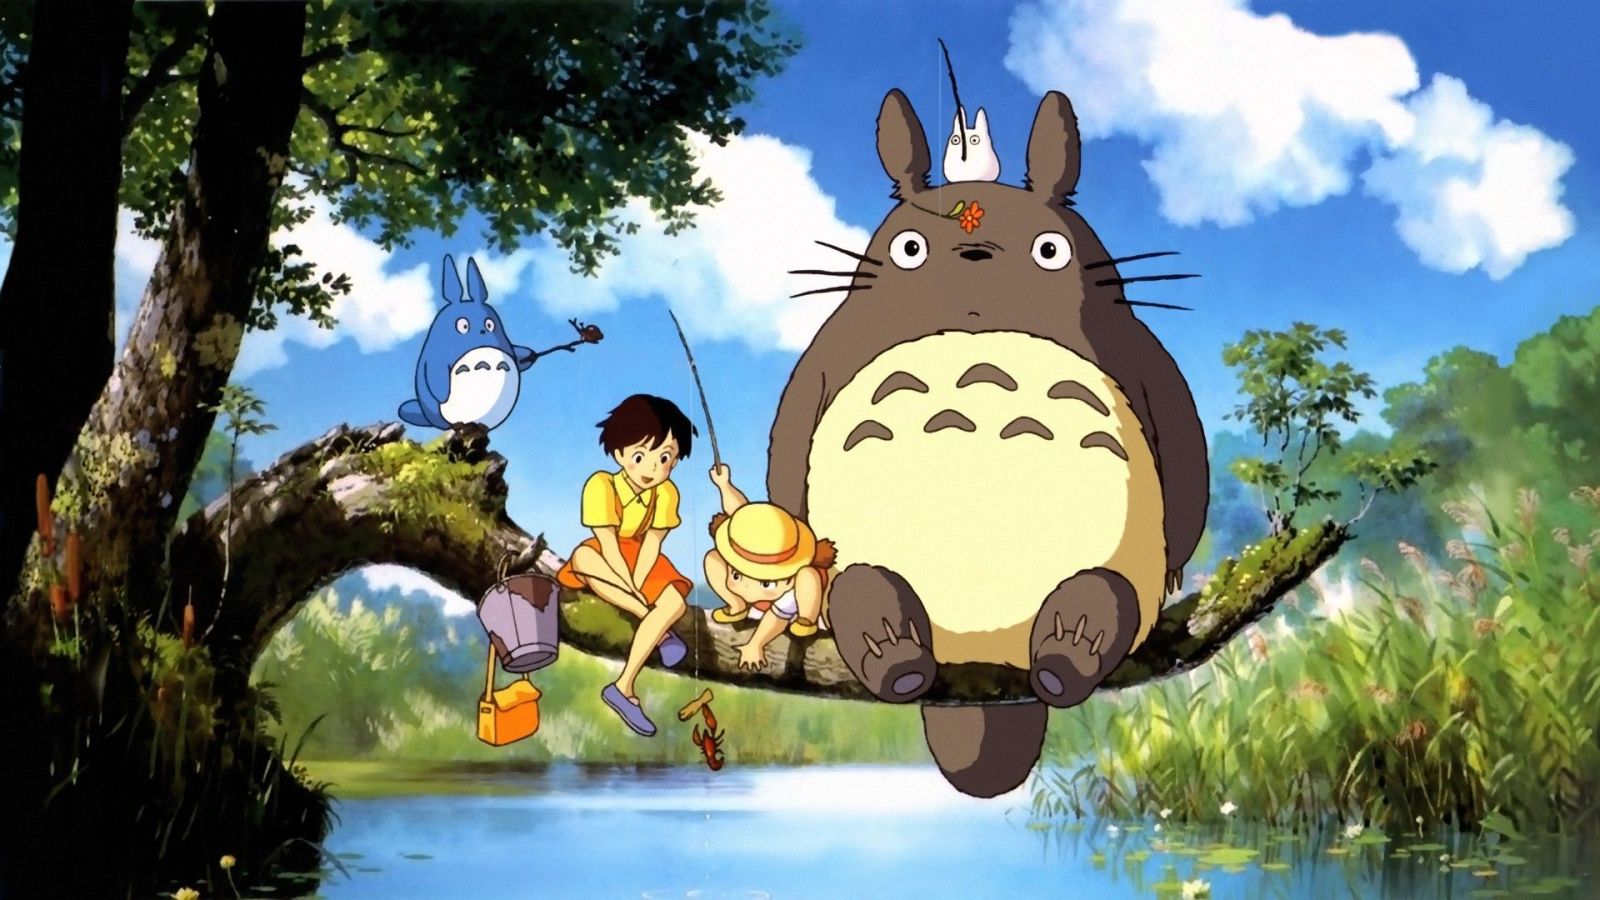 My Neighbor Totoro  Official Trailer  YouTube